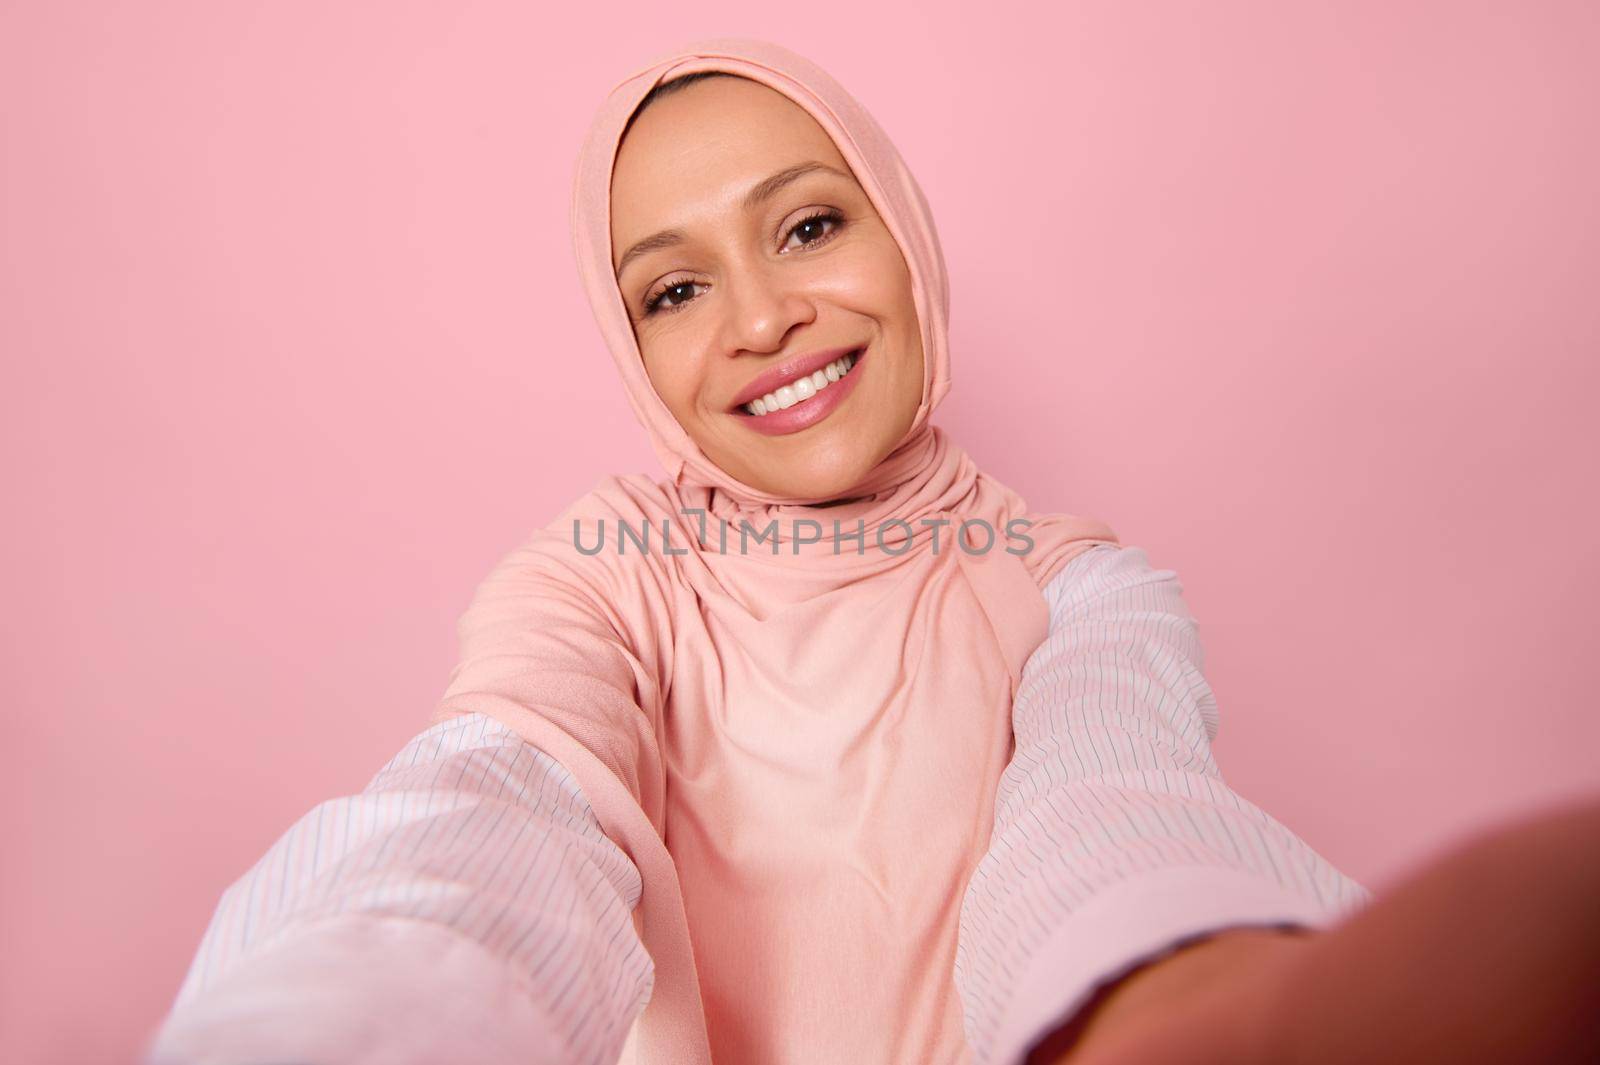 Close-up portrait of Arab Muslim woman wearing traditional religious islamic outfit, pink hijab, holding smartphone in outstretched arms and smiles with toothy smile making a selfie, self-portrait